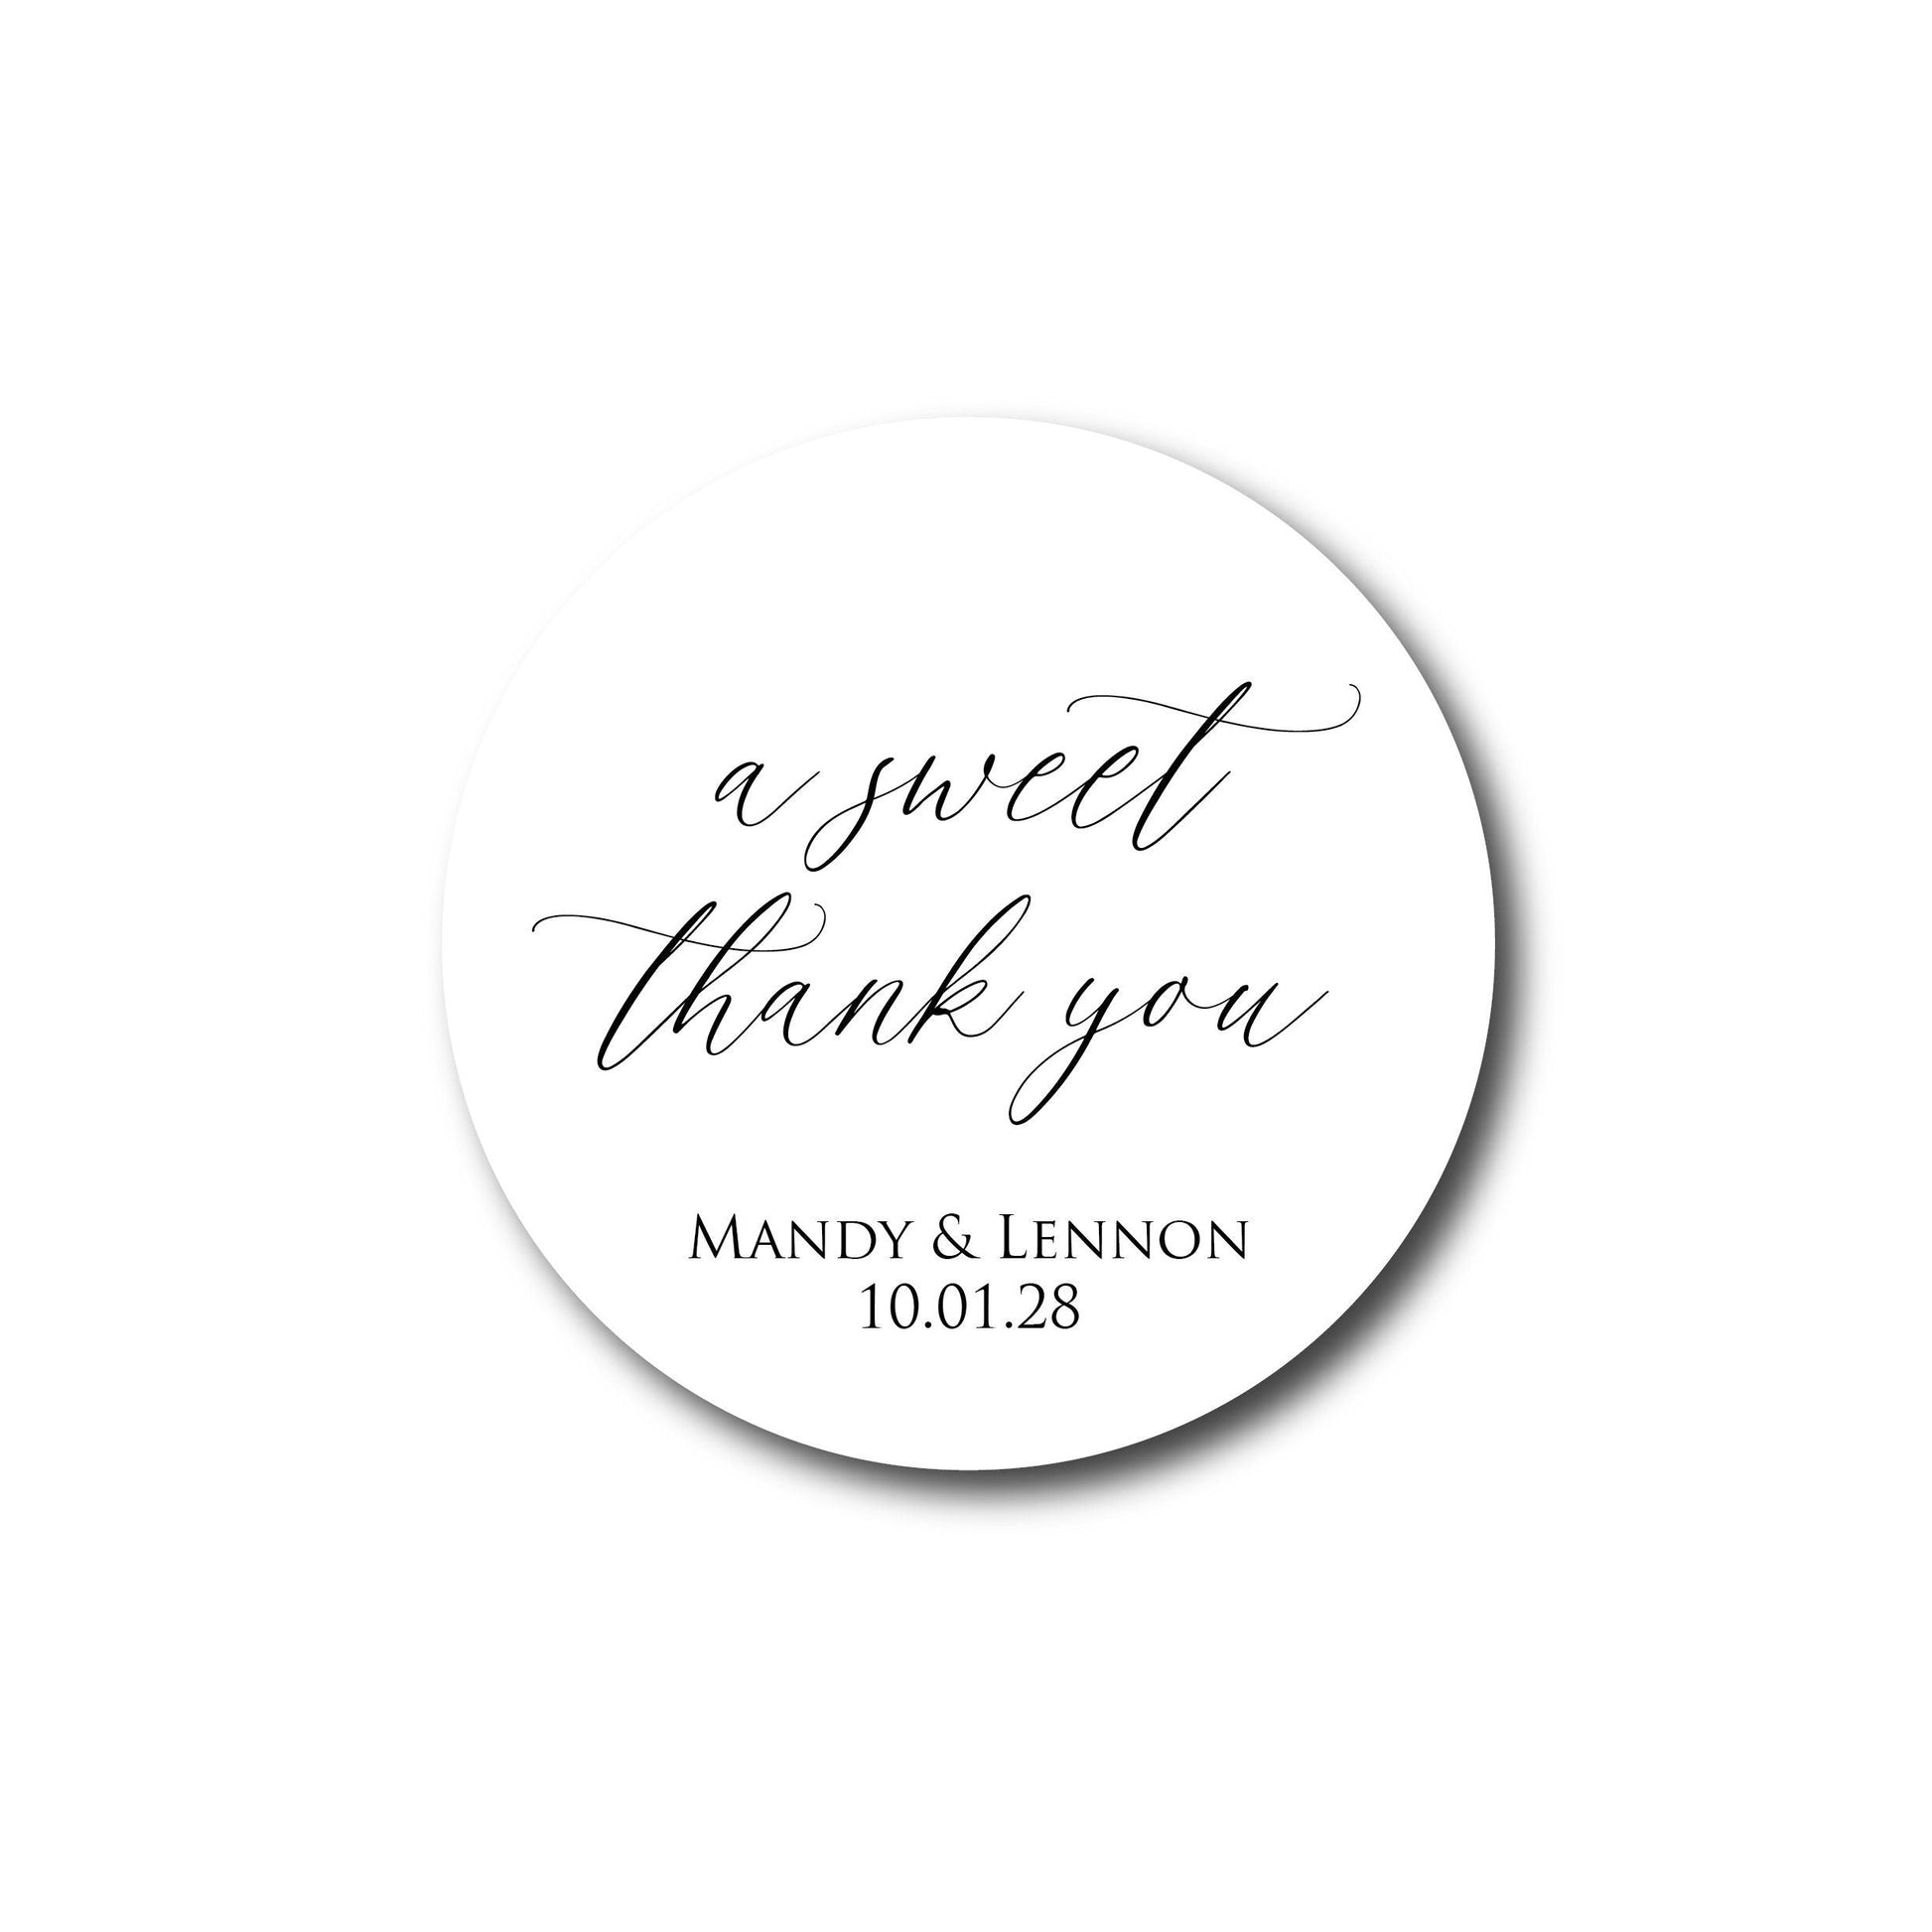 Wedding Stickers - A Sweet Thank You Personalized Wedding Favor Labels Minimalist Script Calligraphy Favors Wedding Labels Thank You Sticker